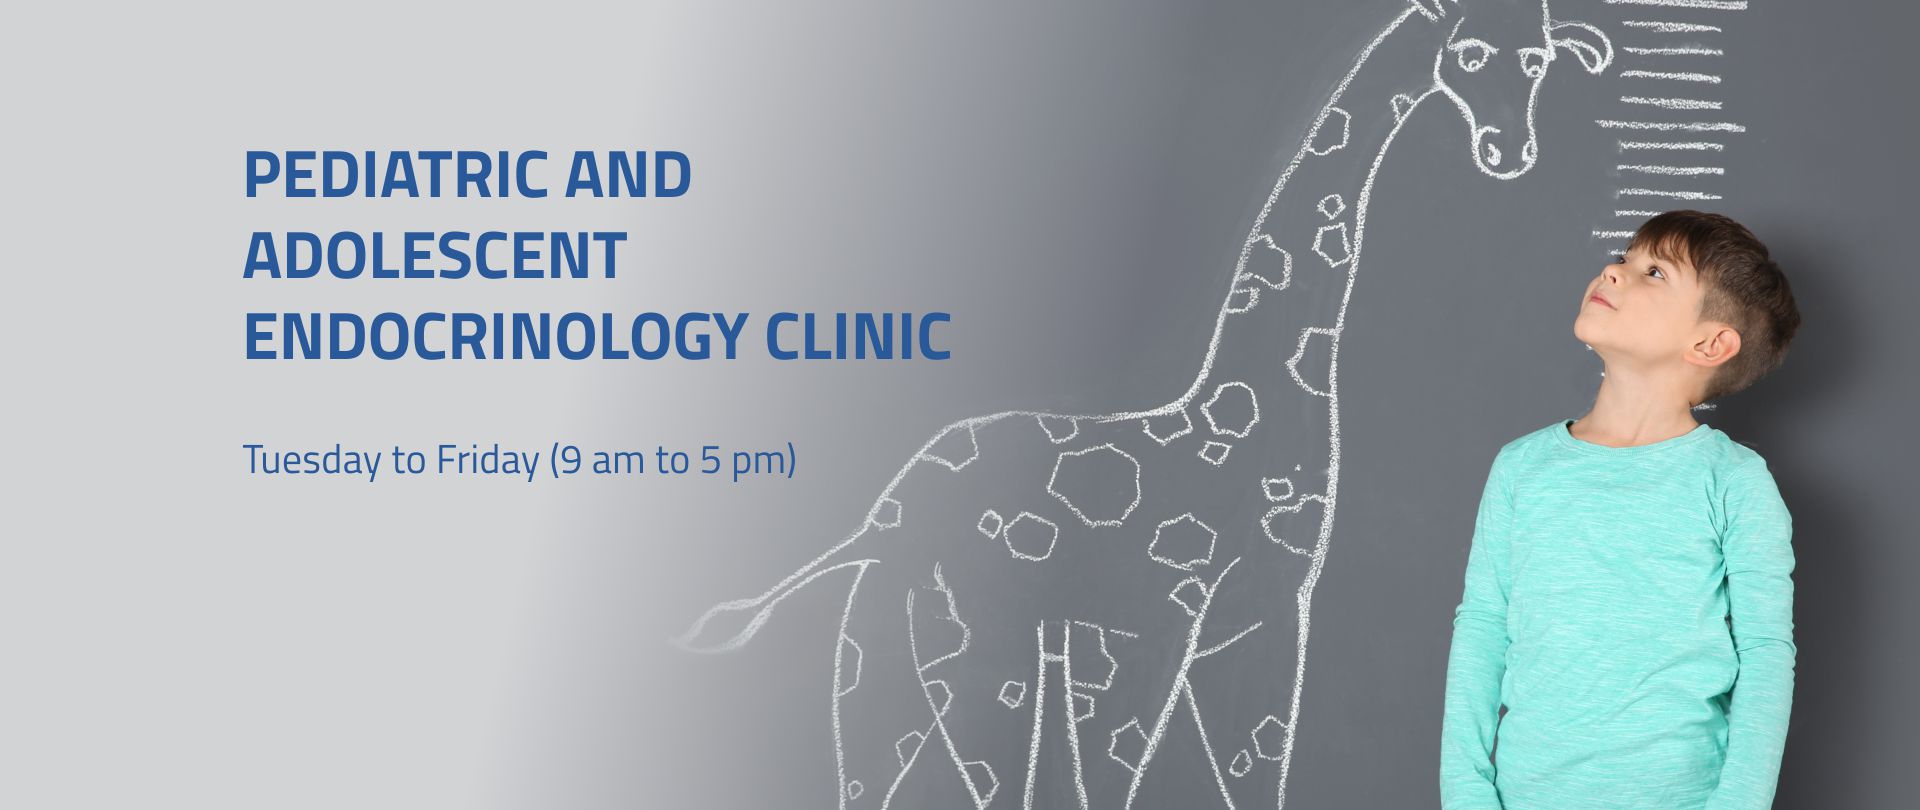 Pediatric and adolescent endocrinology clinic